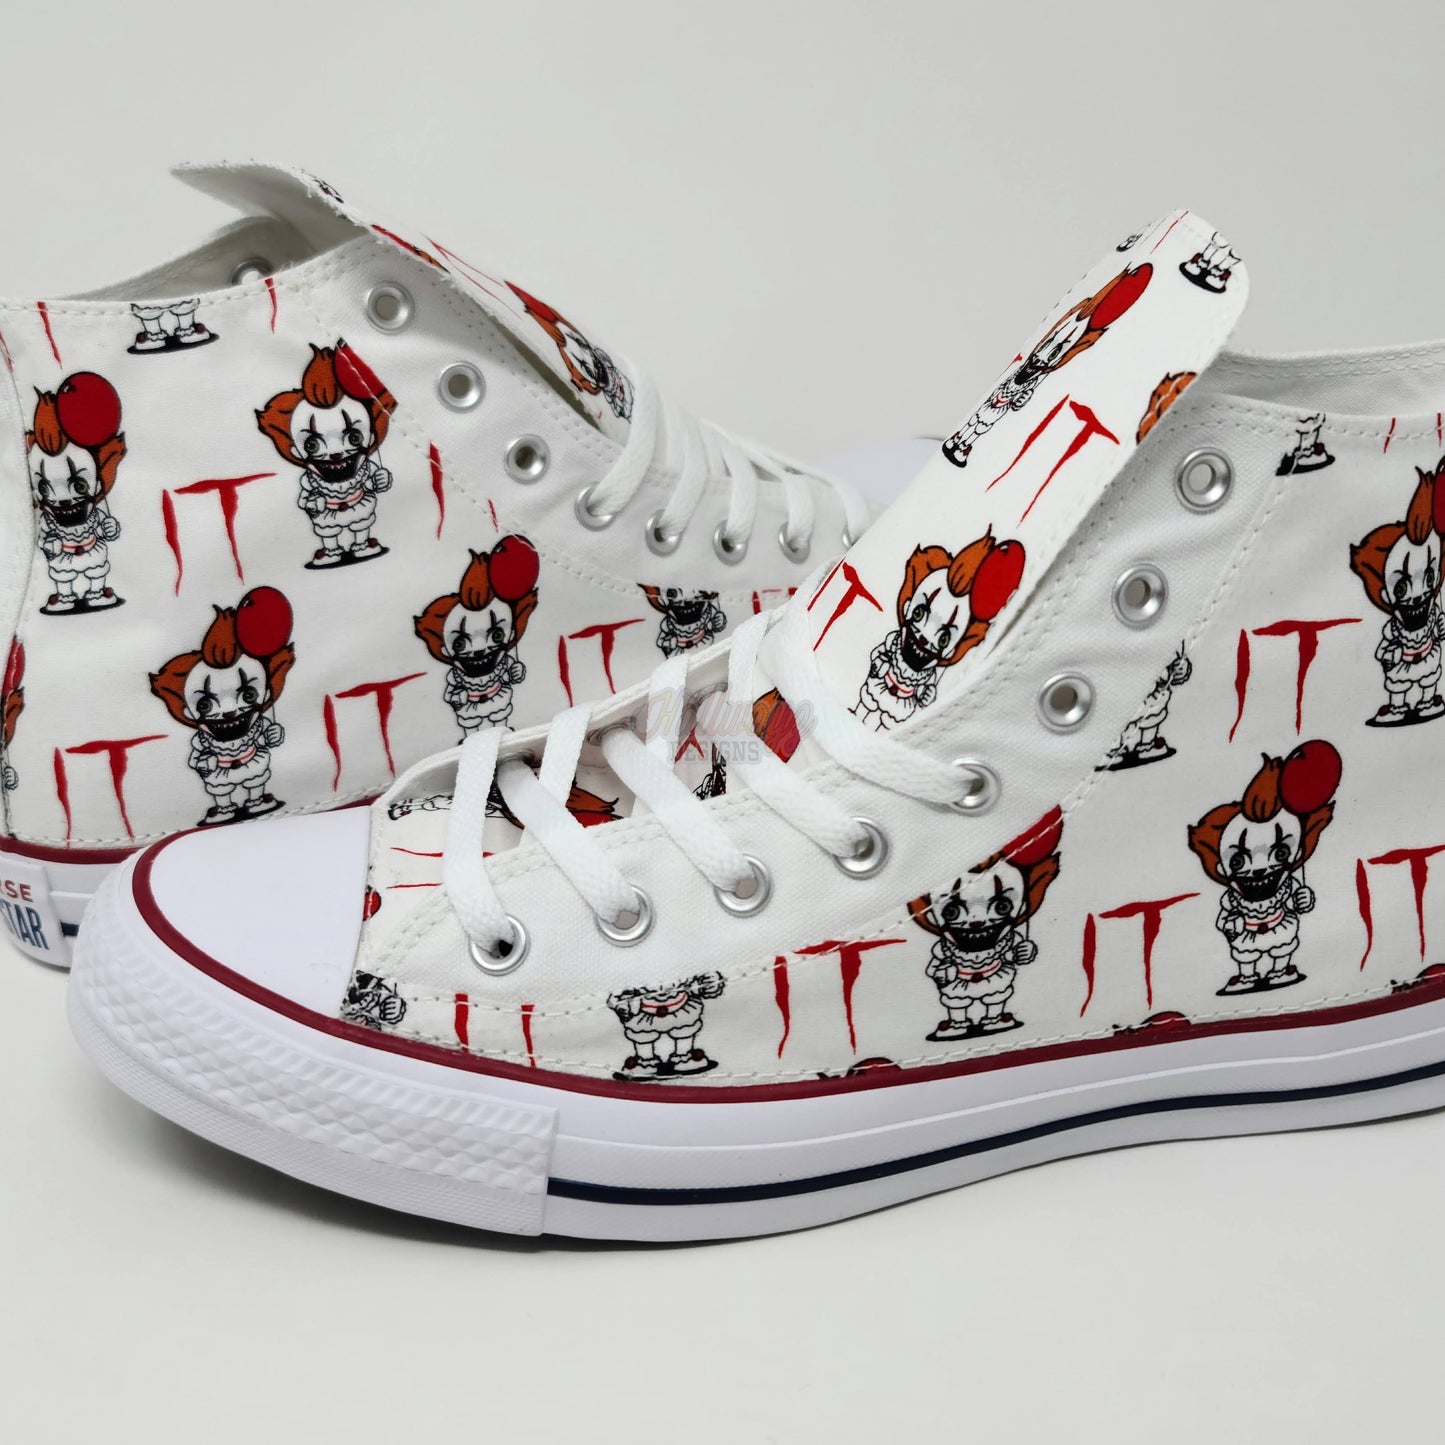 Size 11 men "It Pennywise Converse Shoes"- Ready to Ship